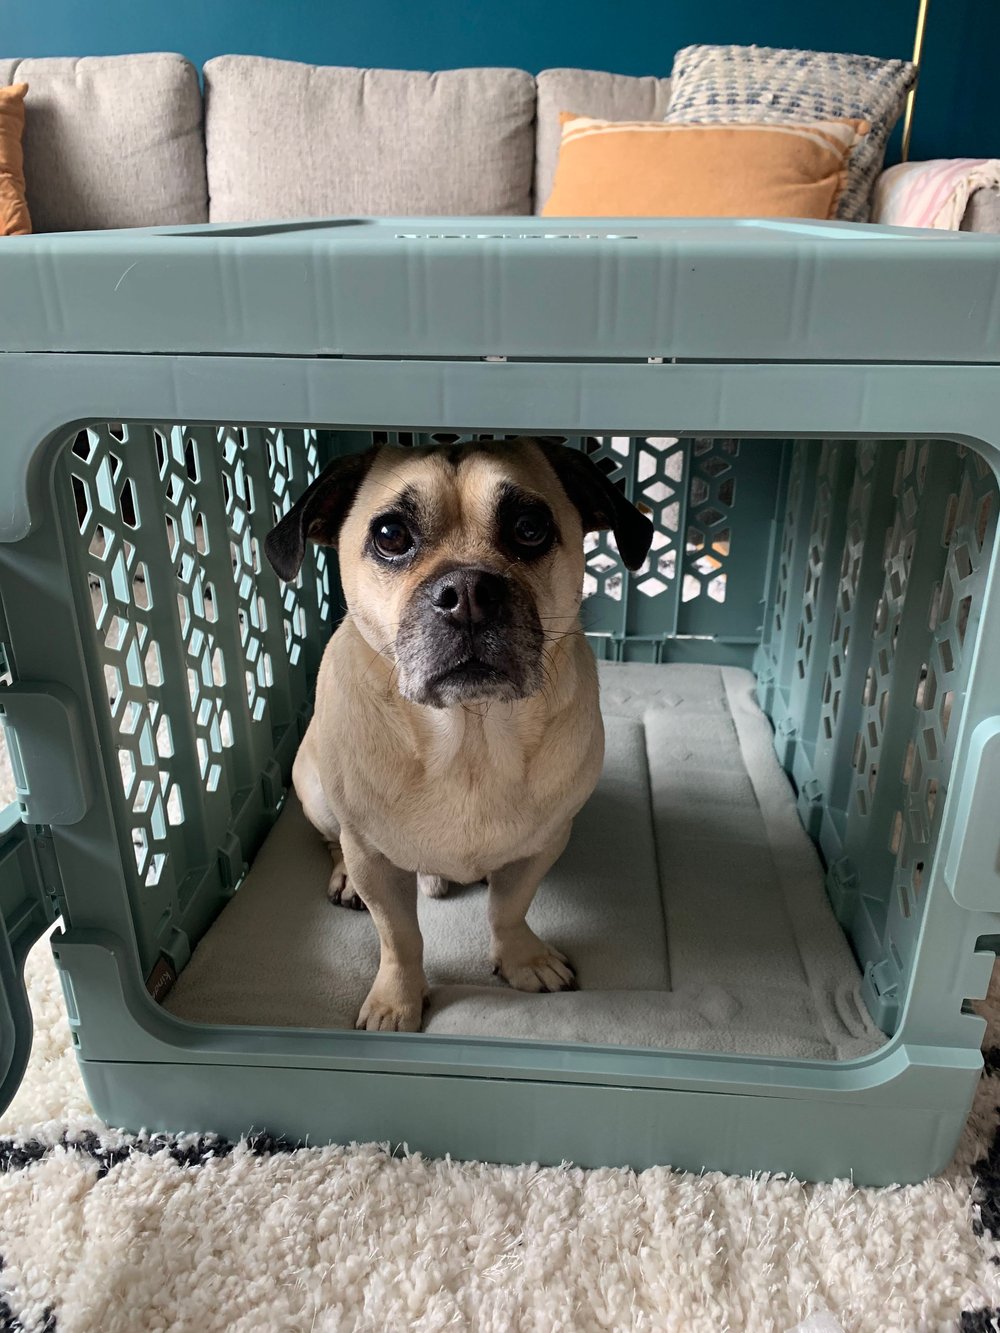 How to Crate Train a Dog, According to a Professional Dog Trainer